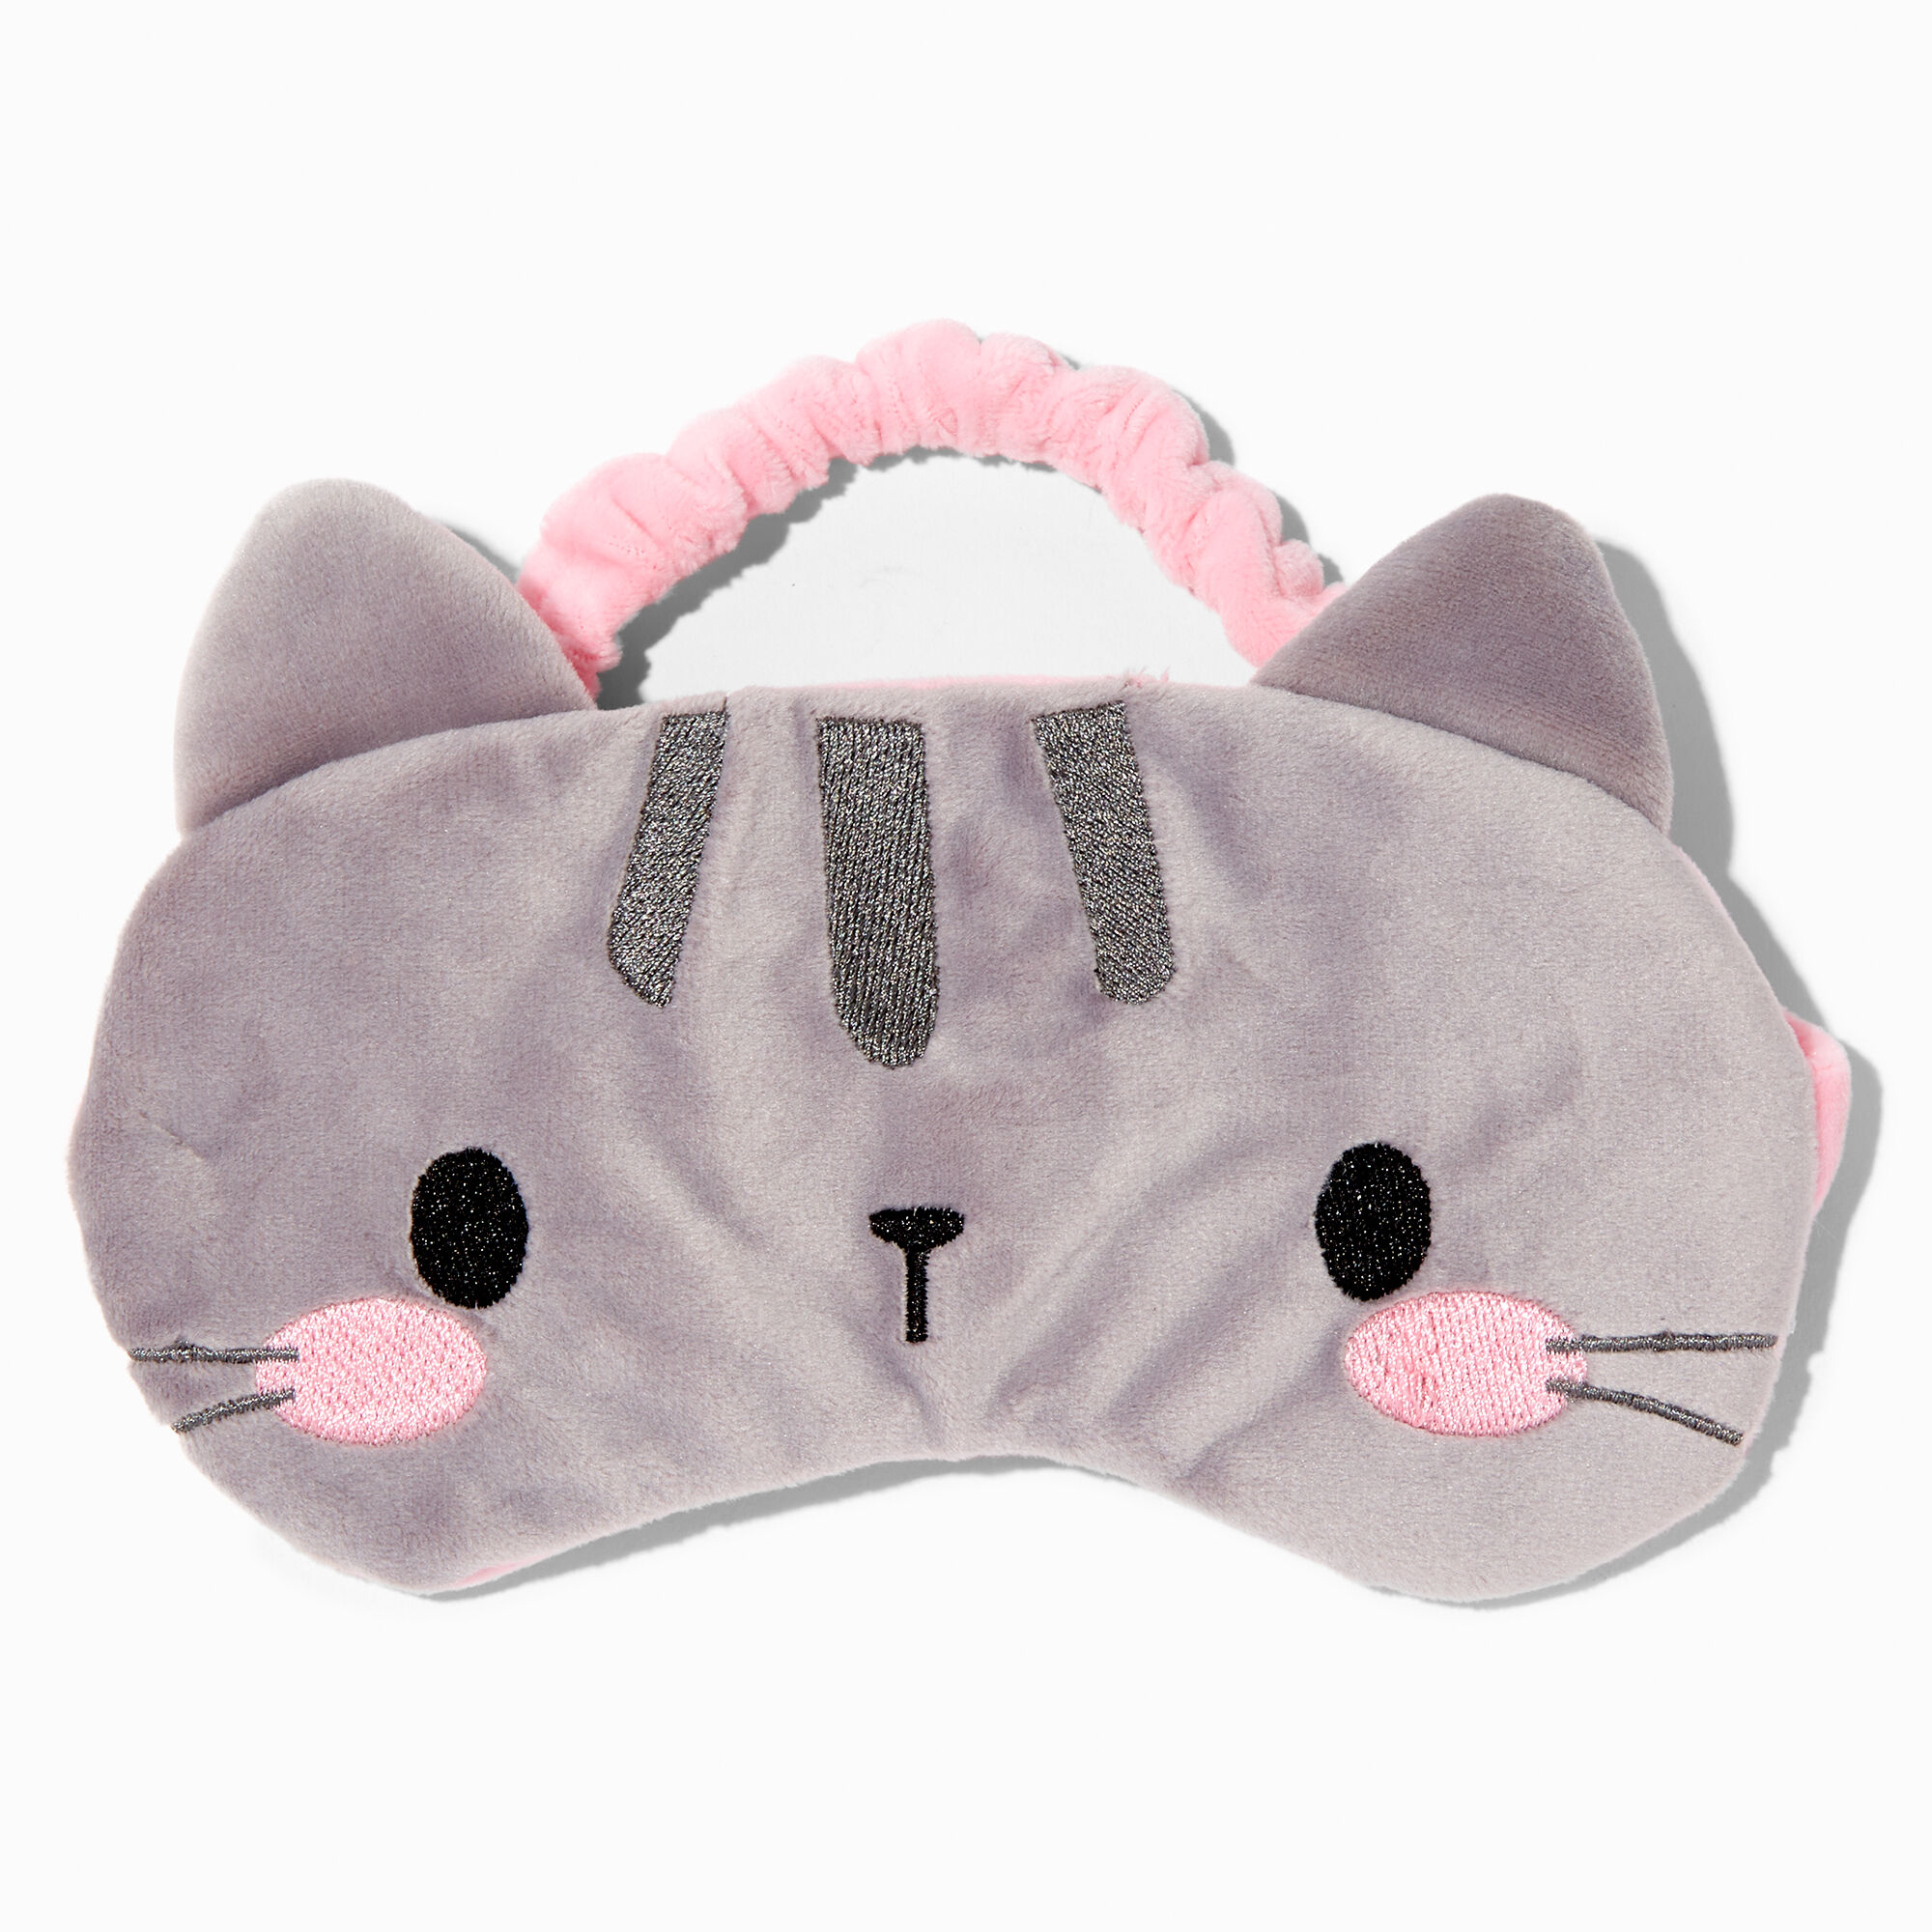 View Claires Cat Plush Sleeping Mask Gray information